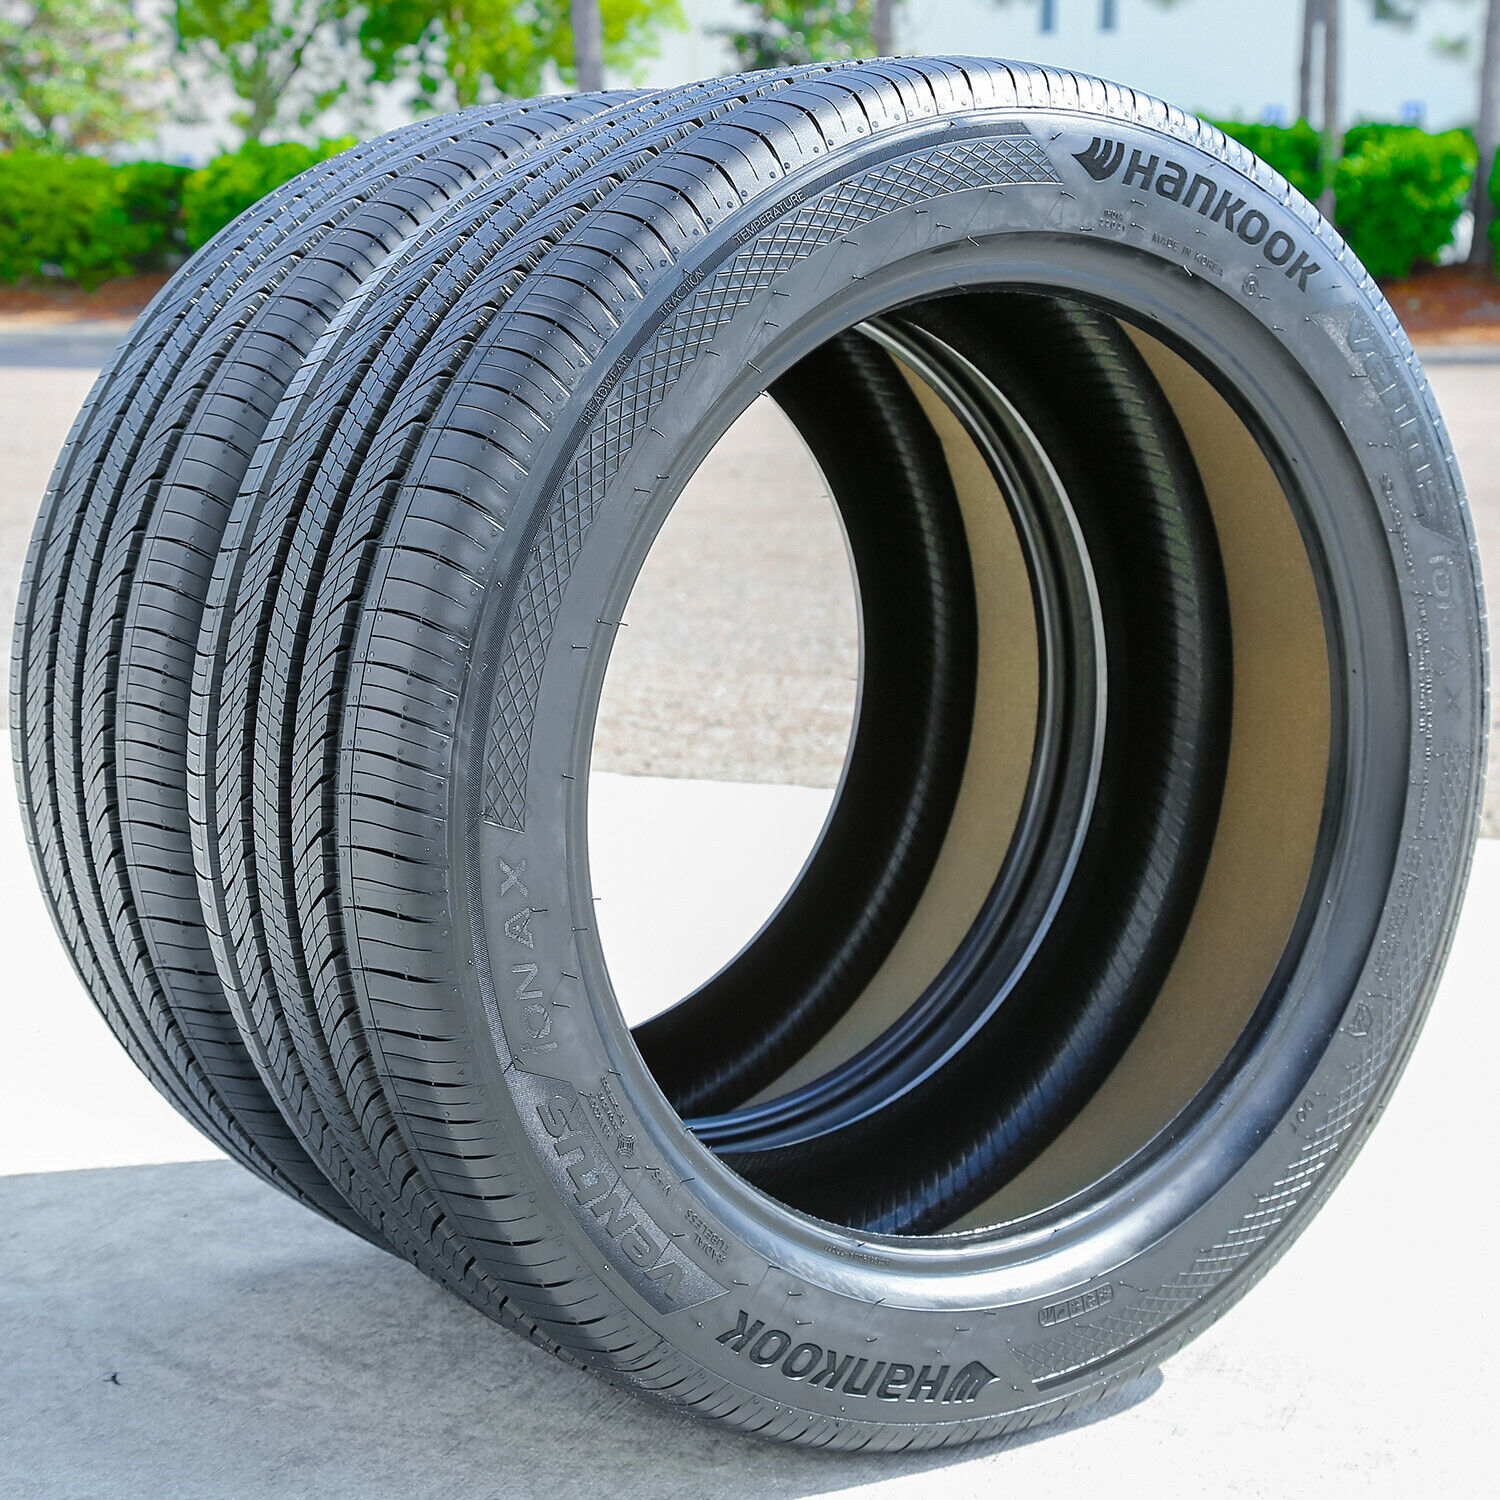 2 Tires Hankook Ventus iON AX 235/45R21 101Y XL AS A/S High Performance